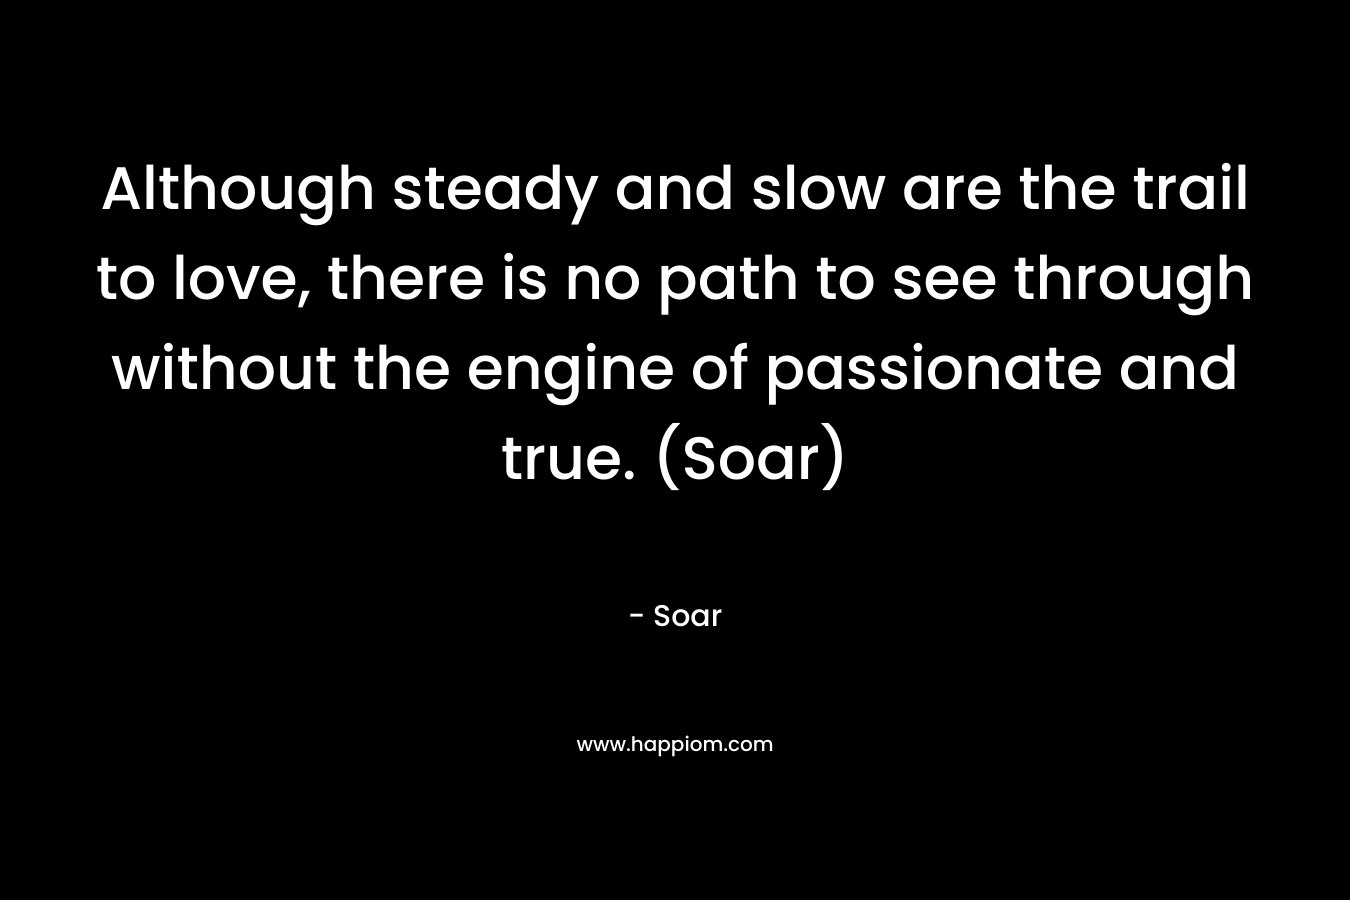 Although steady and slow are the trail to love, there is no path to see through without the engine of passionate and true. (Soar) – Soar